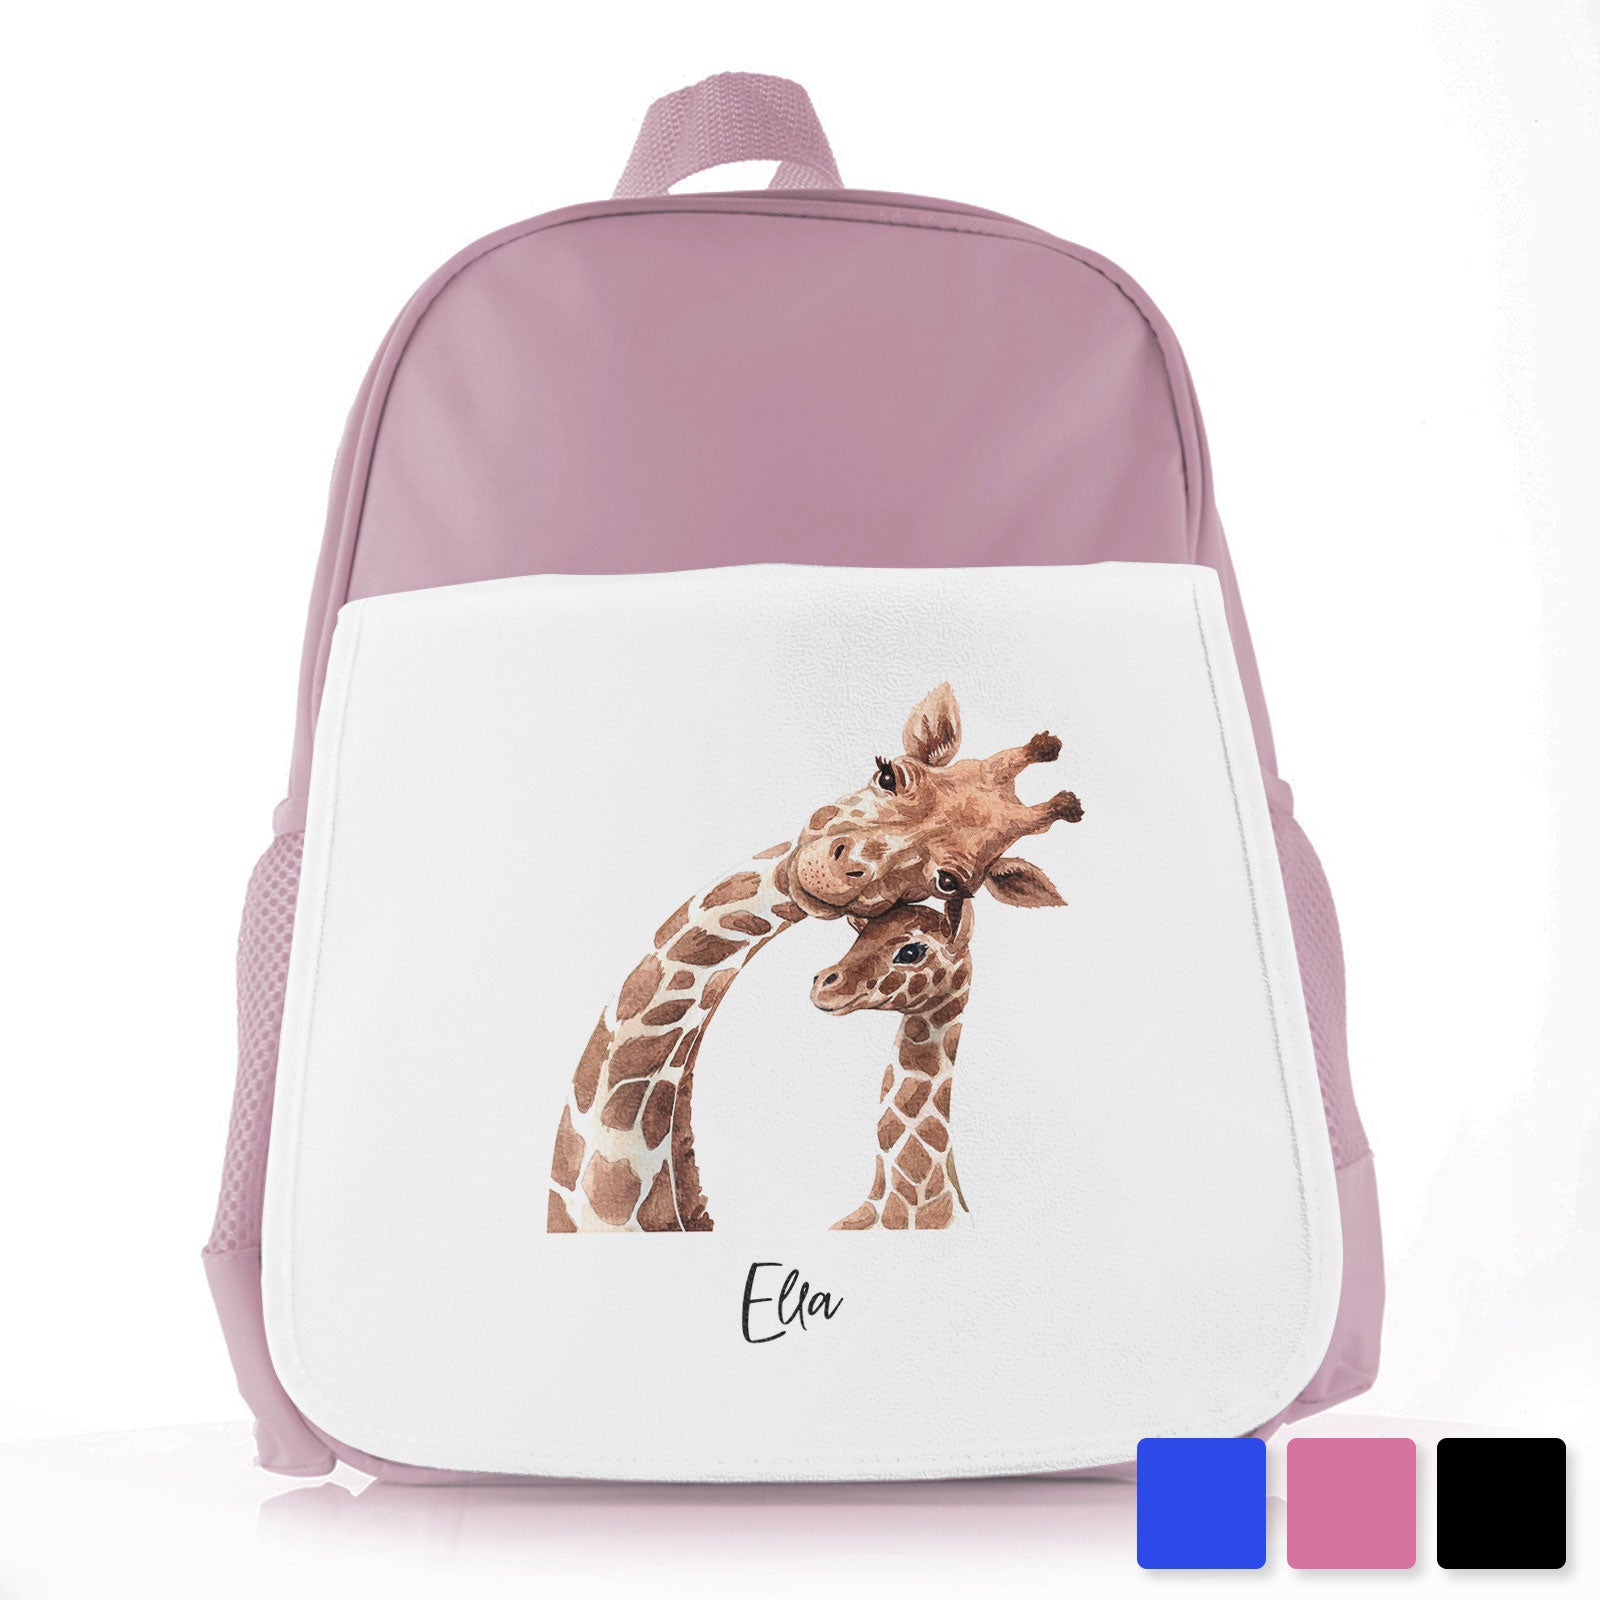 Personalised School Bag/Rucksack with Welcoming Text and Relaxing Mum and Baby Giraffes